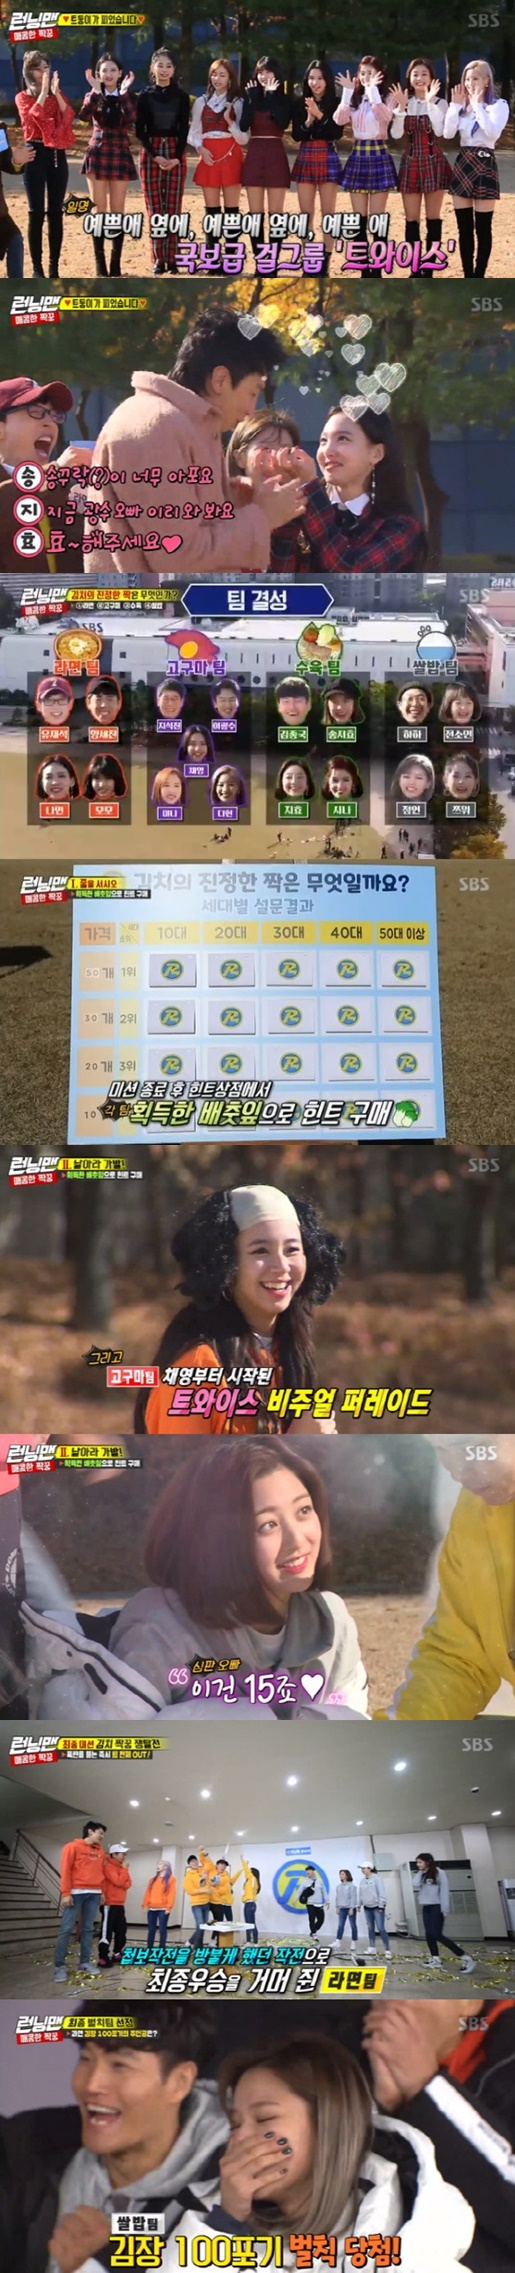 <p>Unexpected shit hand TWICE the Running Man Best 1 minute accounted.</p><p>Viewership survey Agency Nielsen Korea, according to the last 2 days of the broadcast of ‘Running Man’is a national level 5. 4%, 7. 6% watch recorded.</p><p>The kimchis true mate, find Kim most distinctive ‘spicy paired peek-a-Boo’ lace decorated in the ‘Running Man’ sister group TWICE home and by members of the acclaimed shorter. This race is a team competition with a view as if the team is Yoo Jae-Suk, Yang and more as well, Momo, I smoke, and Sweet potato team at Suk Jin, Lee Kwang-soo, Chae, Mina, Implementation, Training, Team Kim Jong Kook, Song JI Hyo,, Hyo, Rice team in that one, small, square, Richardson sub divided into.</p><p>Each team has a ‘line’ through the game fierce confrontation unfolded, the team, the academic team, and Sweet potato teams each have 1 win by handing out the hints acquired, and Round 2 of the ‘fly! The wig-switching in the Sweet potato with the team if the team is 1 for, 2 for to or once the hint is acquired.</p><p>The last final round that the menu is attached to the name tag off of the menu when you exchange, while a bomb attached to the name tags off team the power is out, and the menu until the opponent beyond the ‘Star race’began. Ago min is Lee Kwang-soos name tag off, but Lee Kwang-soo is a bomb, this Rice team is the power being out face. Water and water our father, and our exchange in La, teams info to start up, expand, and ‘kimchis true even’exclaim the headquarters seat and headed towards, training, team support available to the team or the name of the tag off as when I smoke “then”and cry victory.</p><p>Meanwhile, Kim 100 give Driving Cycle penalty for the uncle in the game Rice team of the square ‘shit son’, born and penalties in winning was and this scene is up to 8. 8%(Capital basis)up jumped the ‘best 1 minute’.</p>